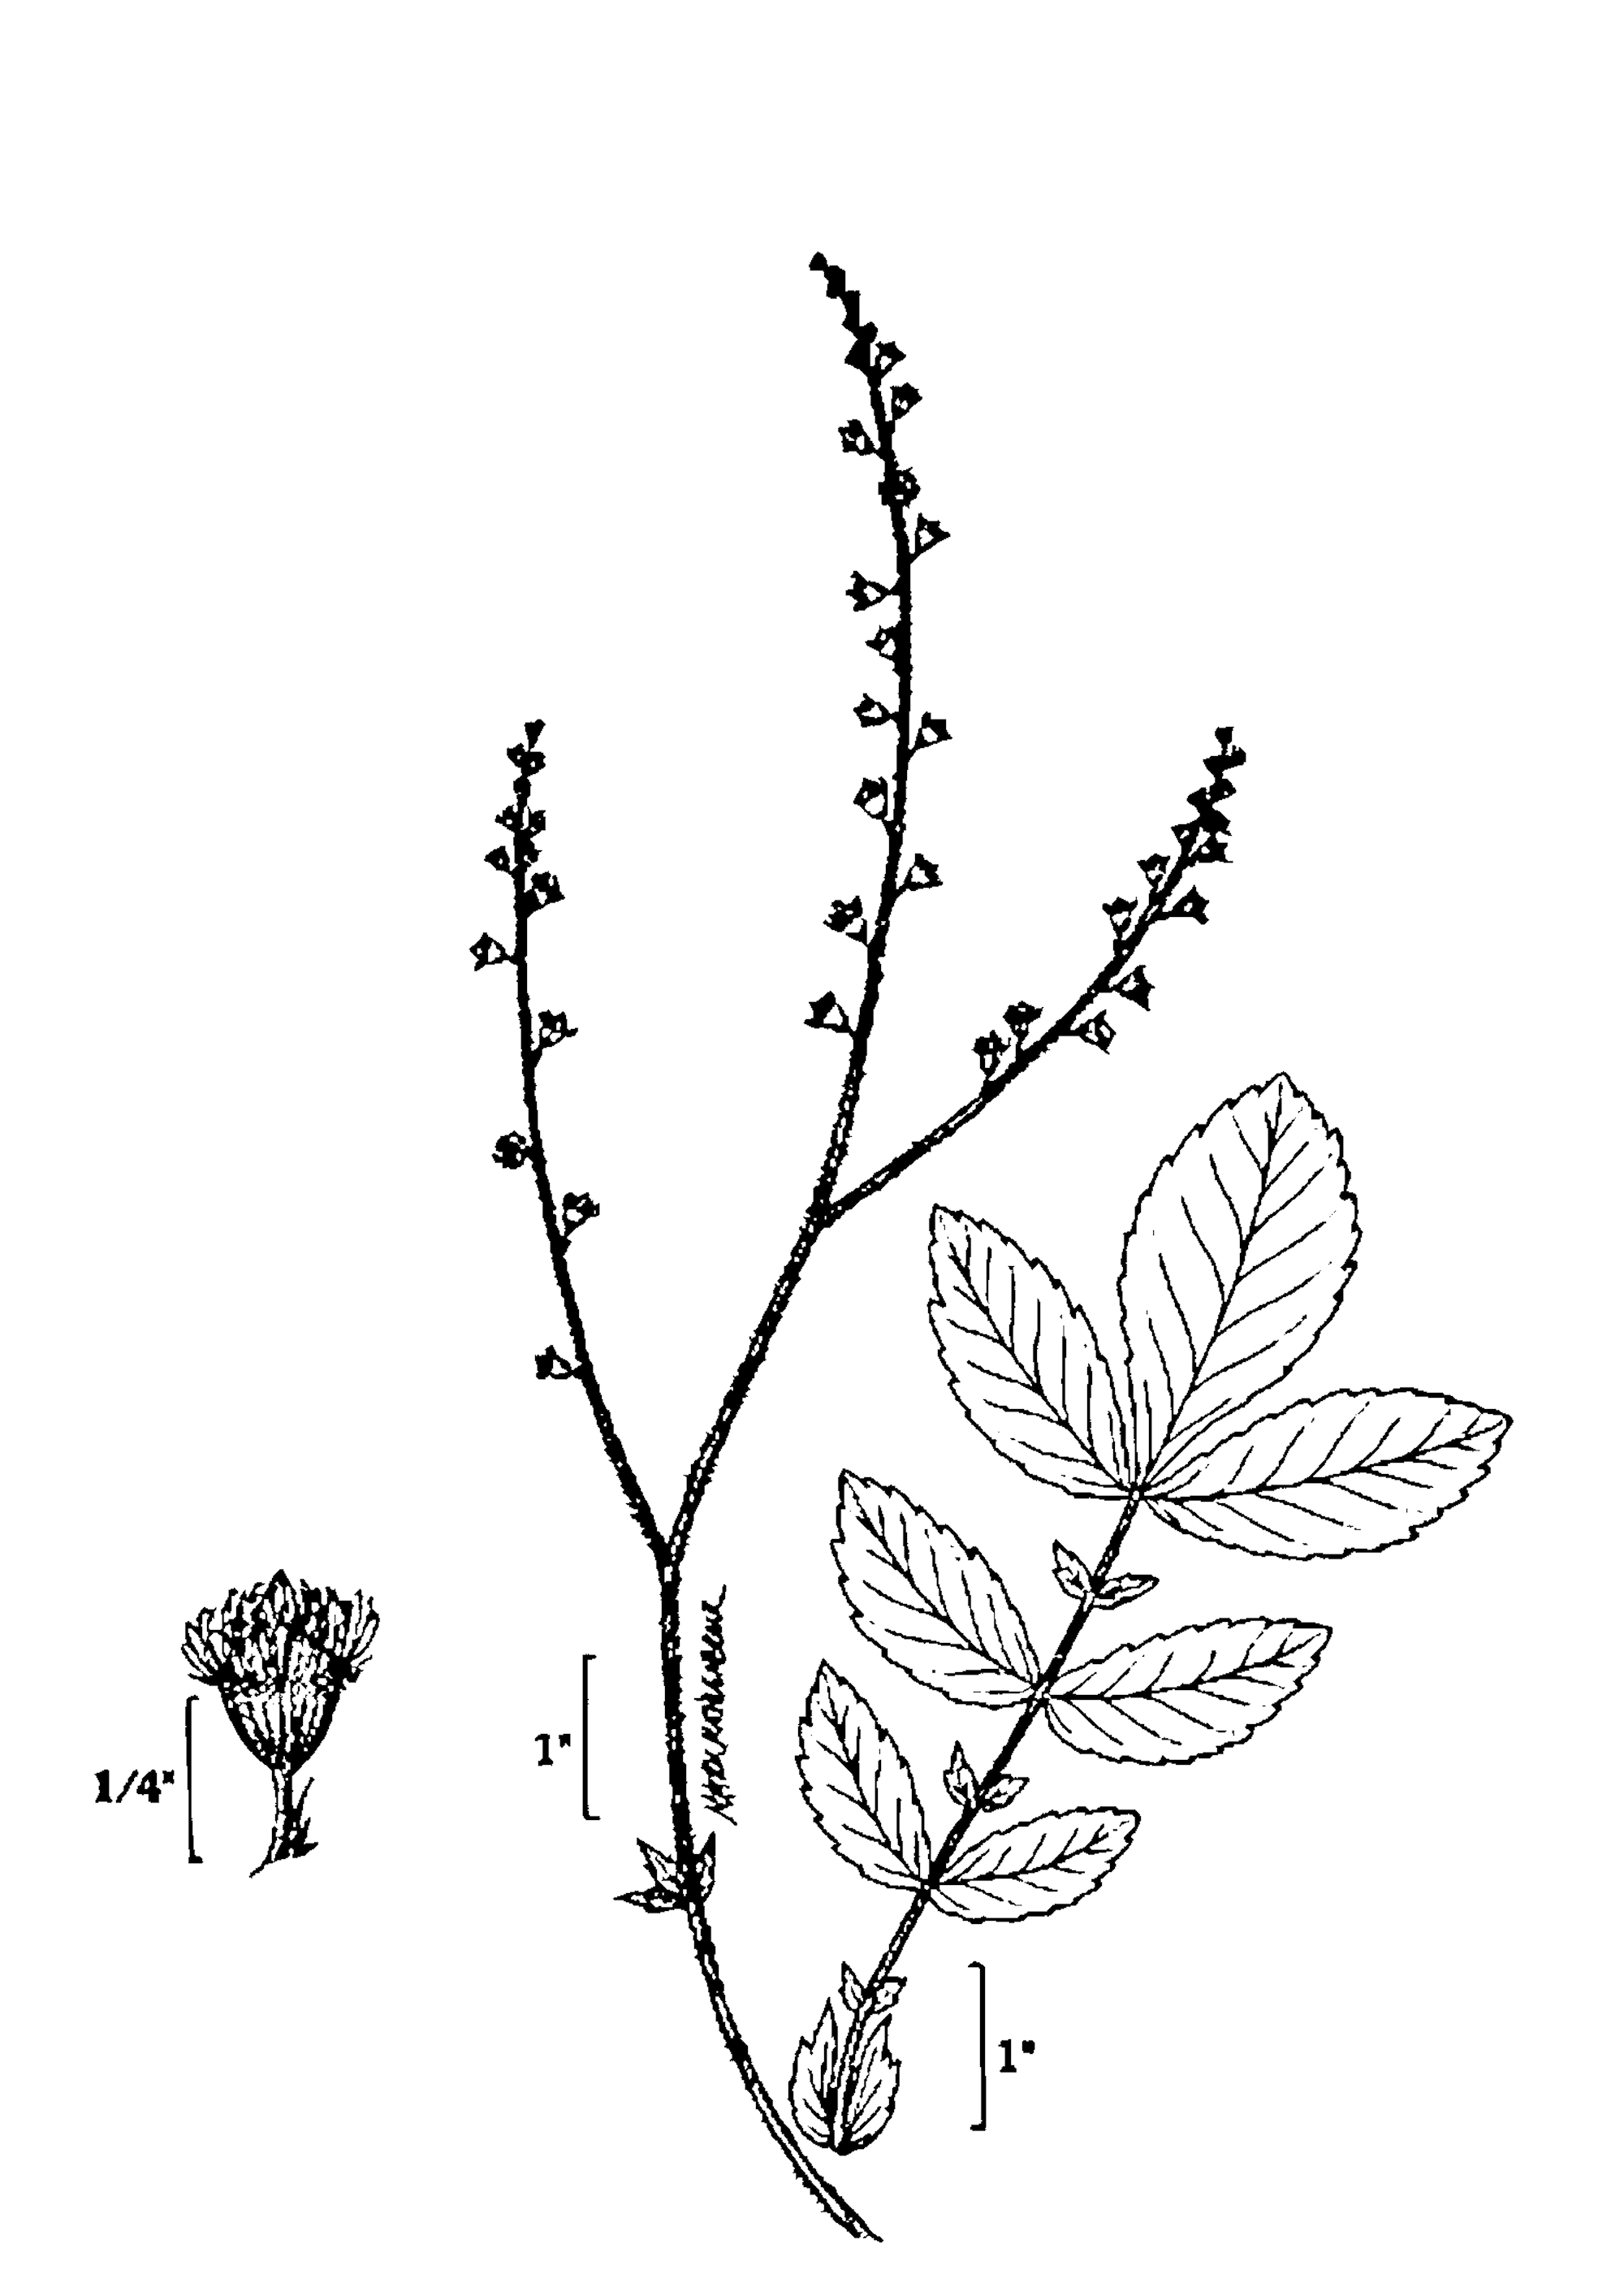 Tall Hairy Agrimony line drawing from USDA  NRCS, Wetland flora: Field office illustrated guide to plant species.